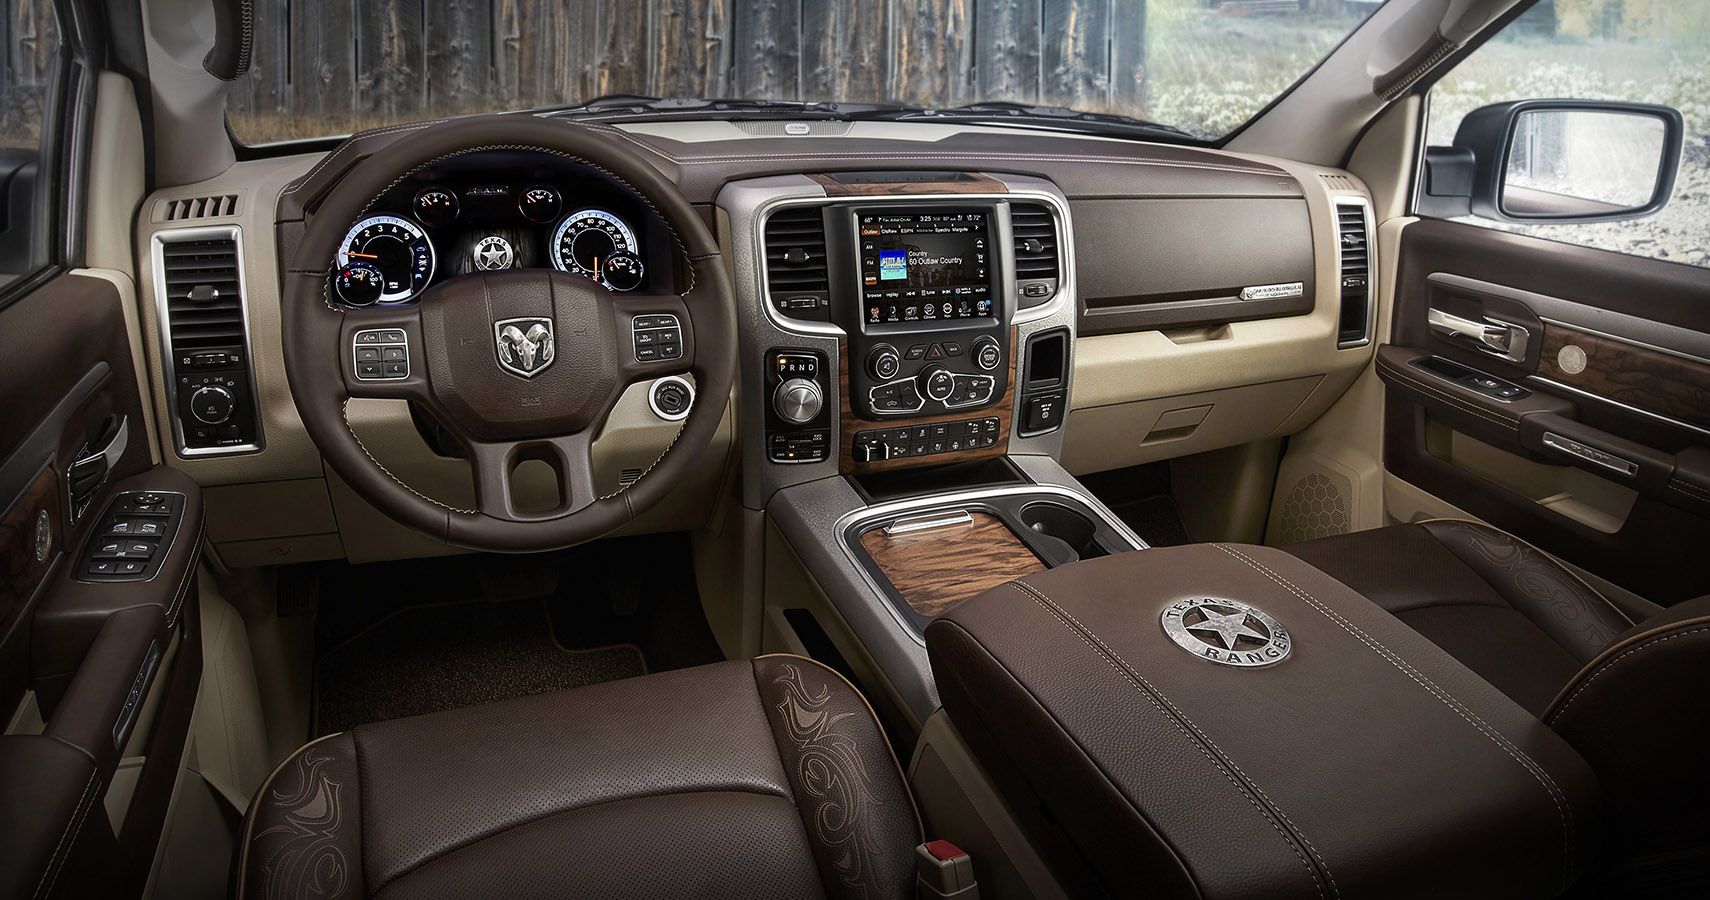 In 2015, Dodge Commemorated This Partnership By Launching The Ram 1500 Texas Ranger Concept Truck